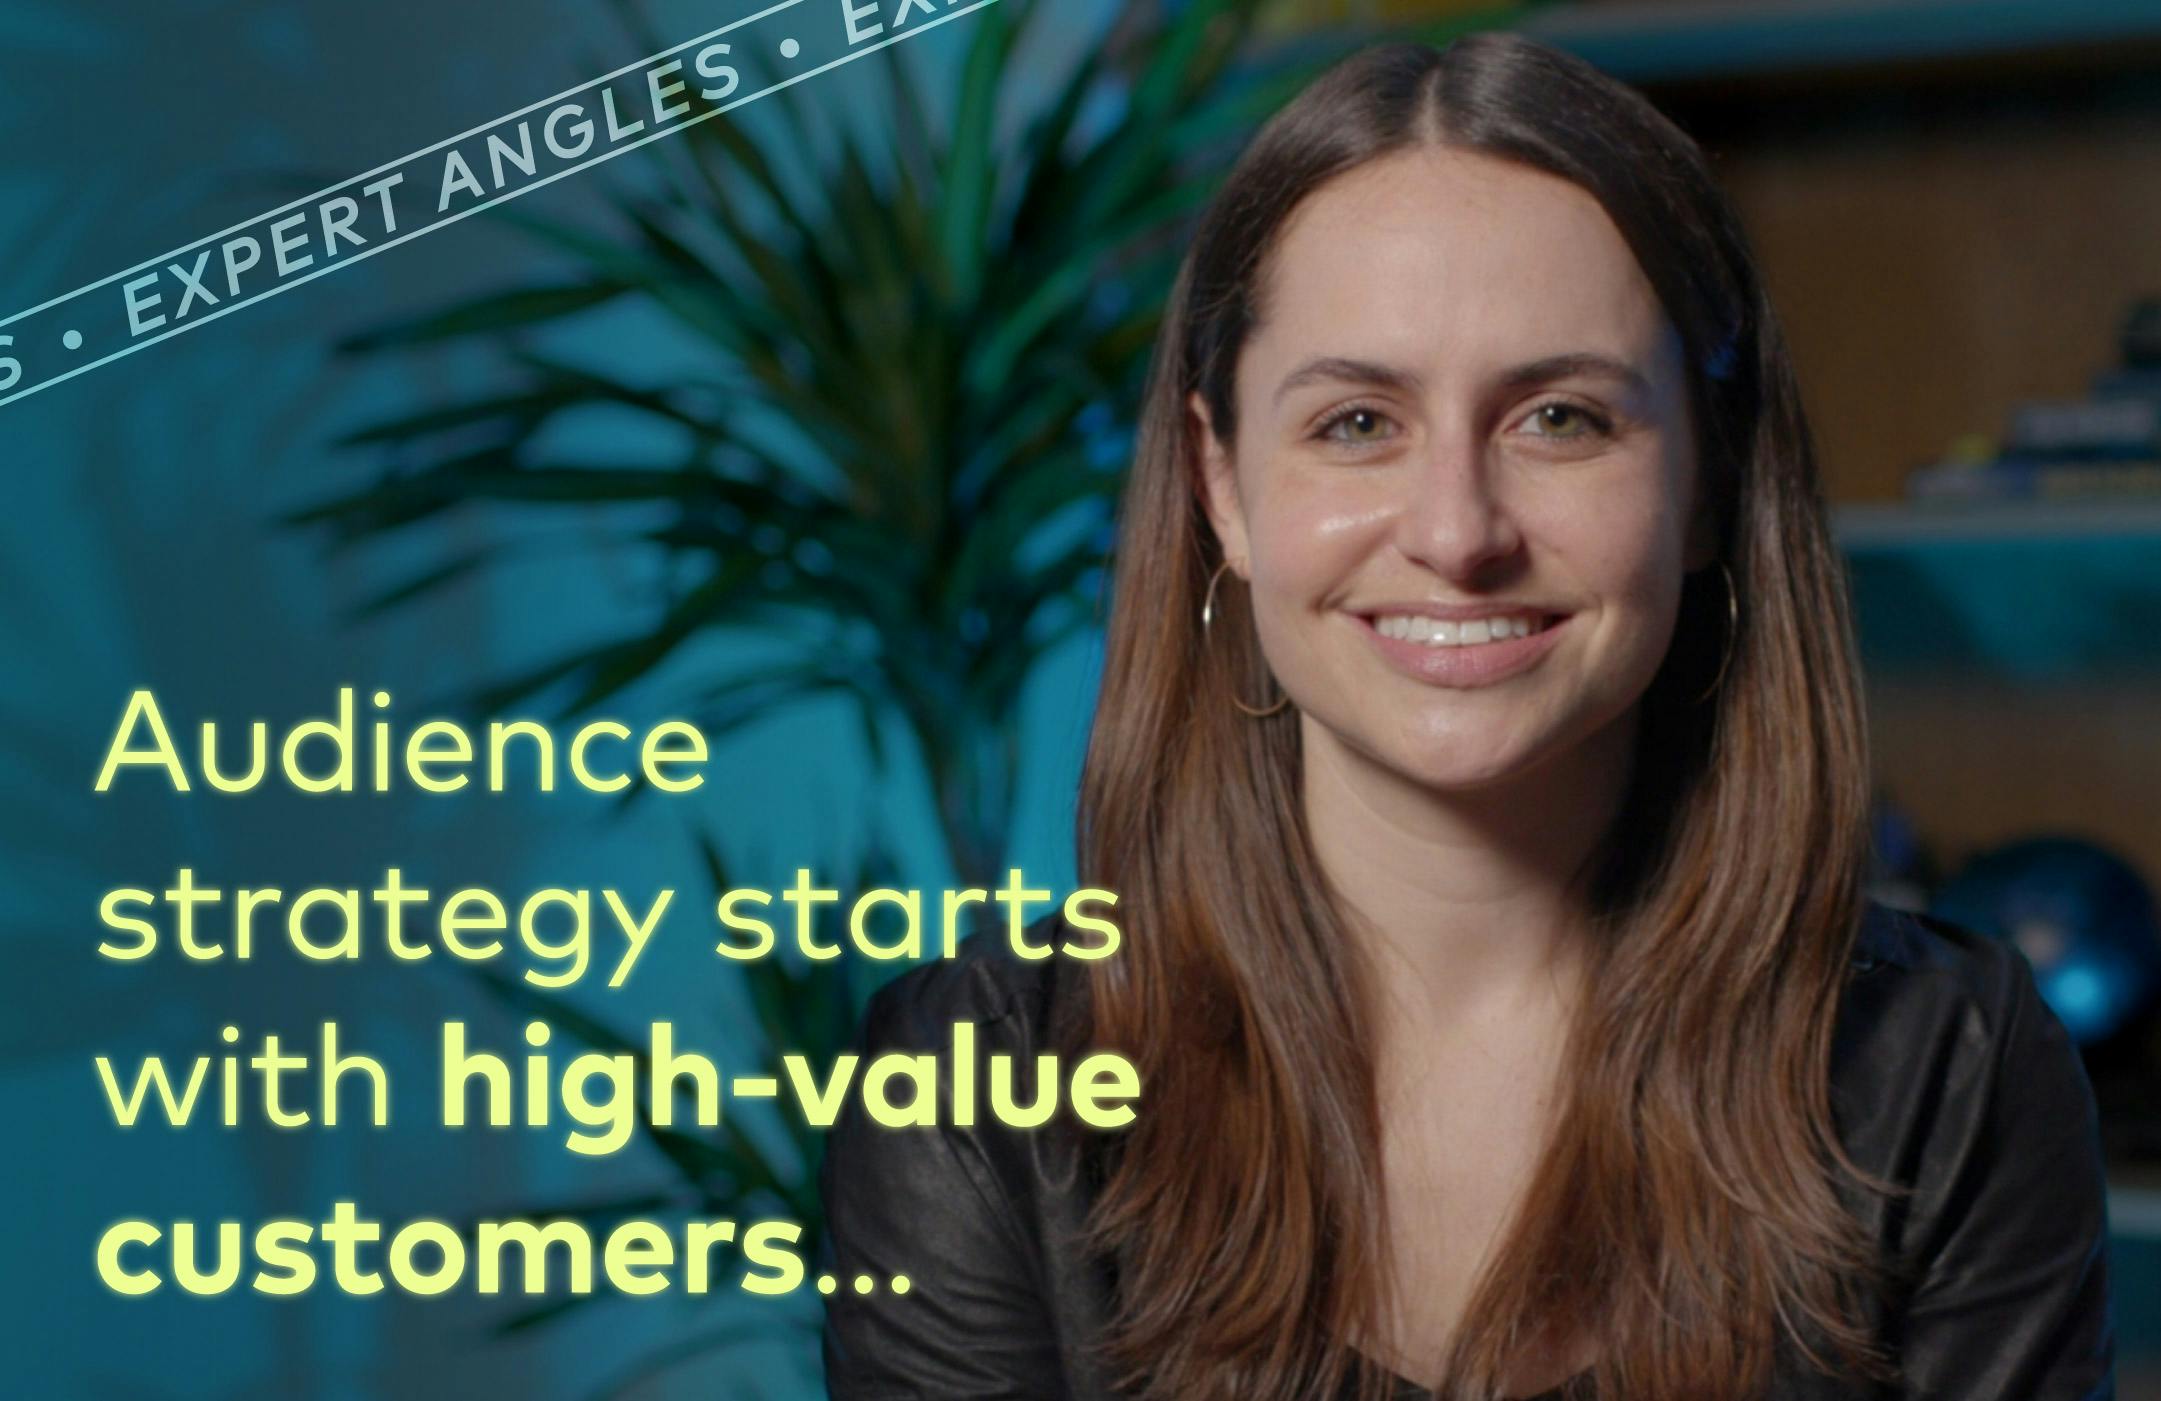 Audience strategy starts with high-value customers...